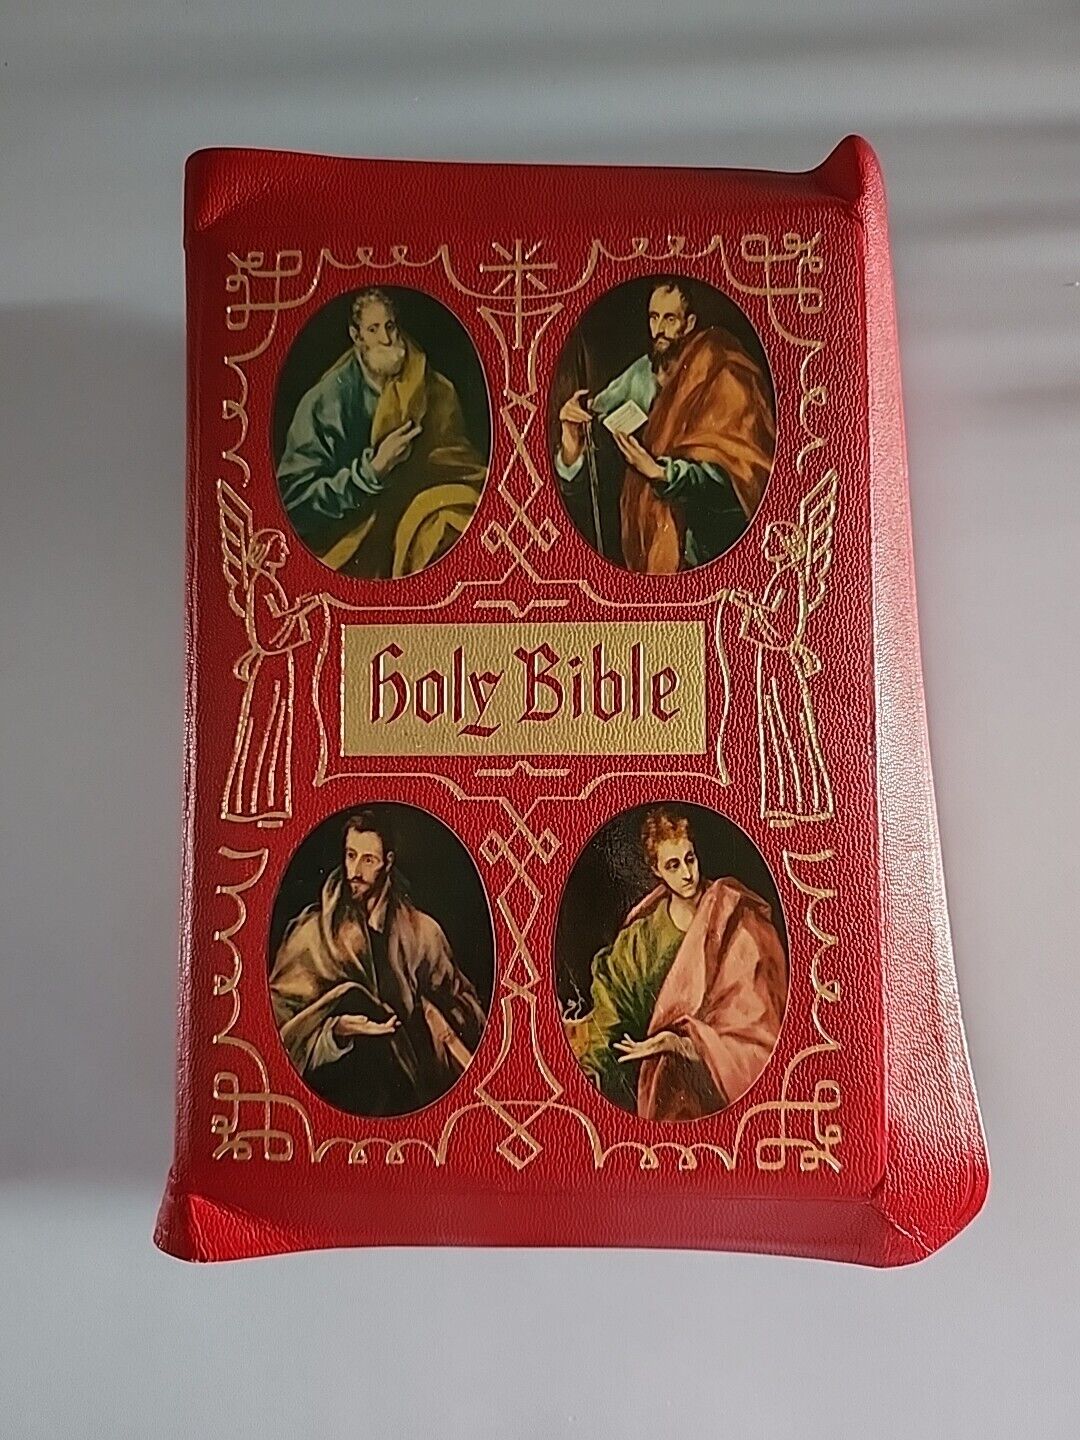 1955 Vintage Holy Bible The Holy Angels Edition Red Leather Excellent Condition 